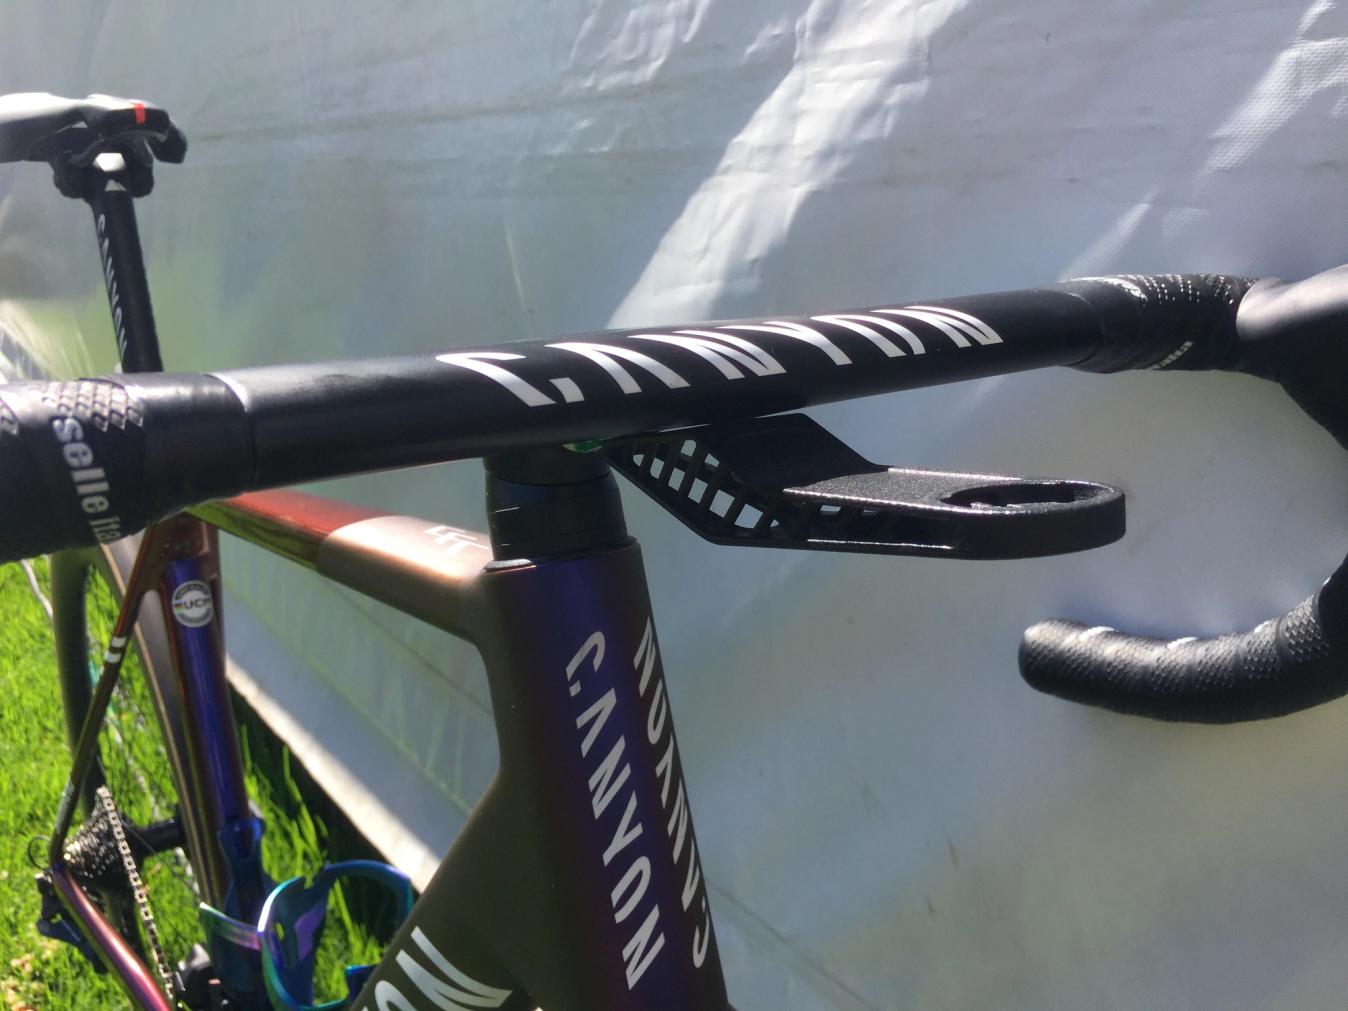 This Canyon Ultimate had a 3D-printed computer mount